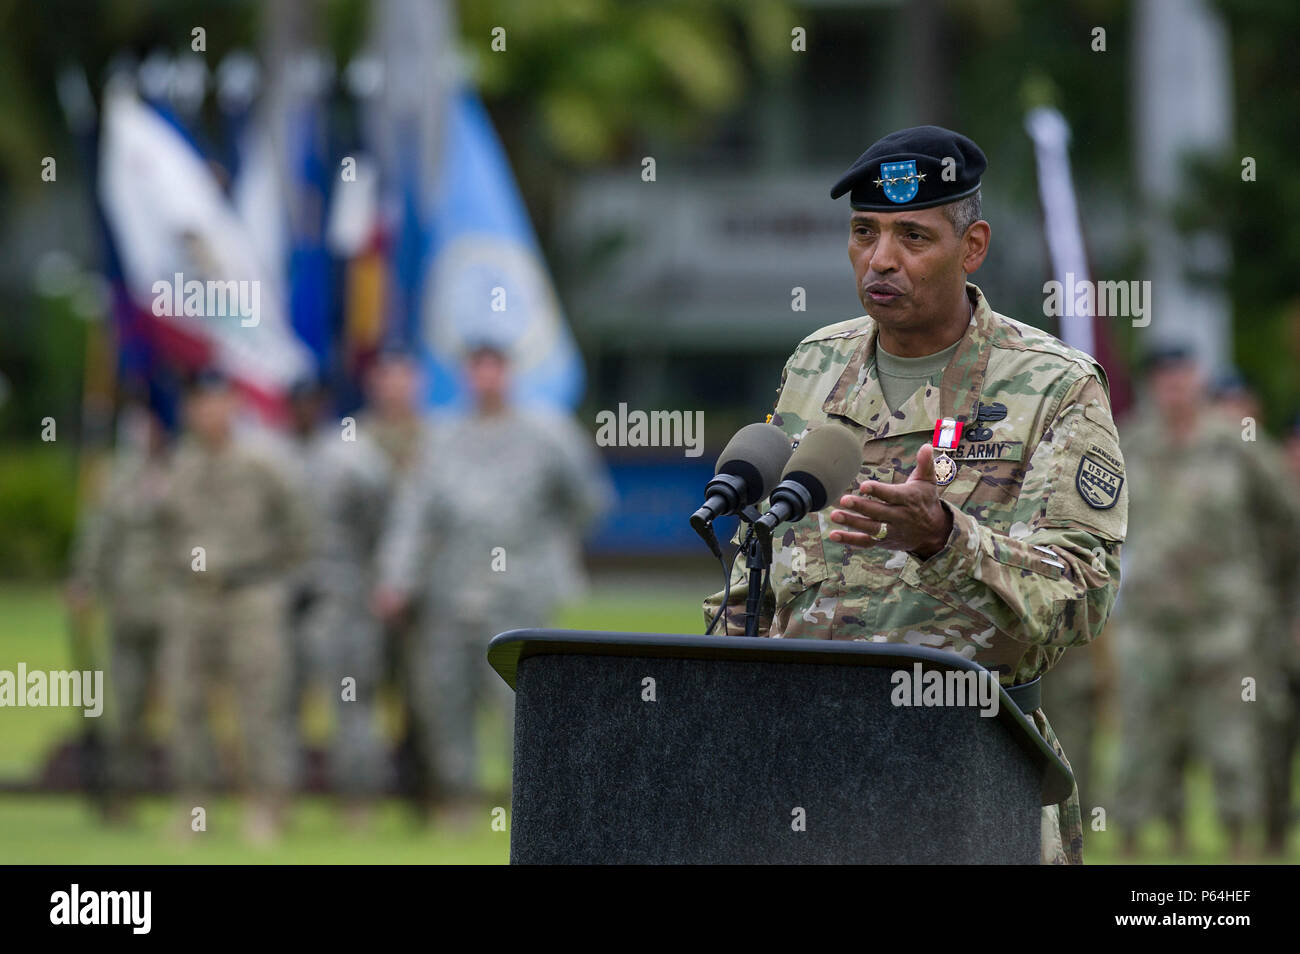 U.S. Army Gen. Vincent Brooks,  U.S. Forces Korea, Combined Forces Command and United Nations commander speaks at the  U.S. Army Pacific  Change of Command May 4, at Fort Shafter, Hawaii. Outgoing USARPAC Commander, Gen. Vincent Brooks assumed command of U.S. Forces Korea, Combined Forces Command and United Nations April 30,  and Gen. Robert Brown officially assumed command of USARPAC during the ceremony. (U.S. Air Force photo by Staff Sgt. Christopher Hubenthal) Stock Photo